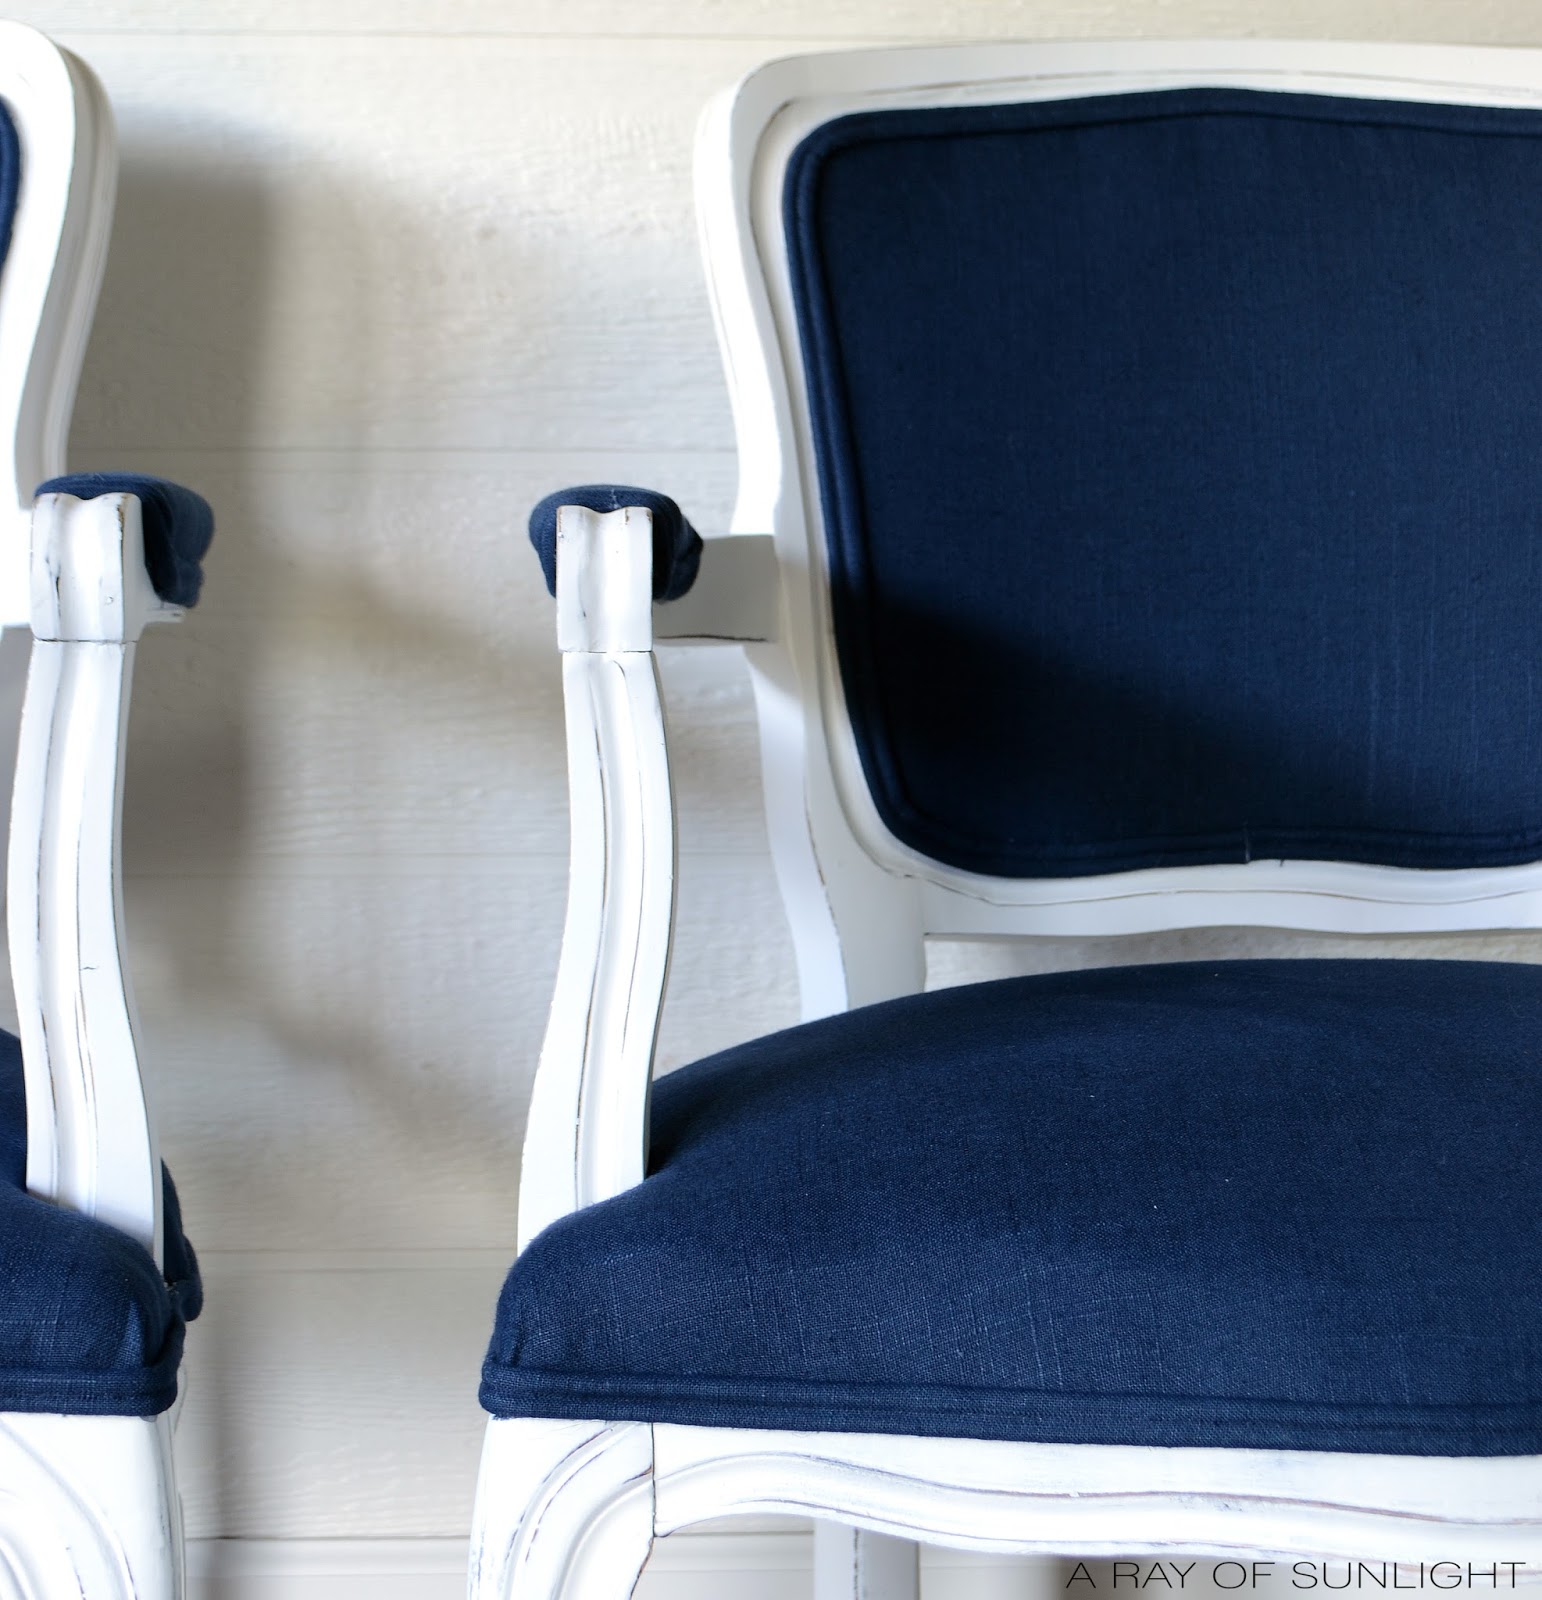 How to easily update old worn out thrift store chairs with some paint and fabric by A Ray of Sunlight Furniture. Love the navy blue and white makeover!